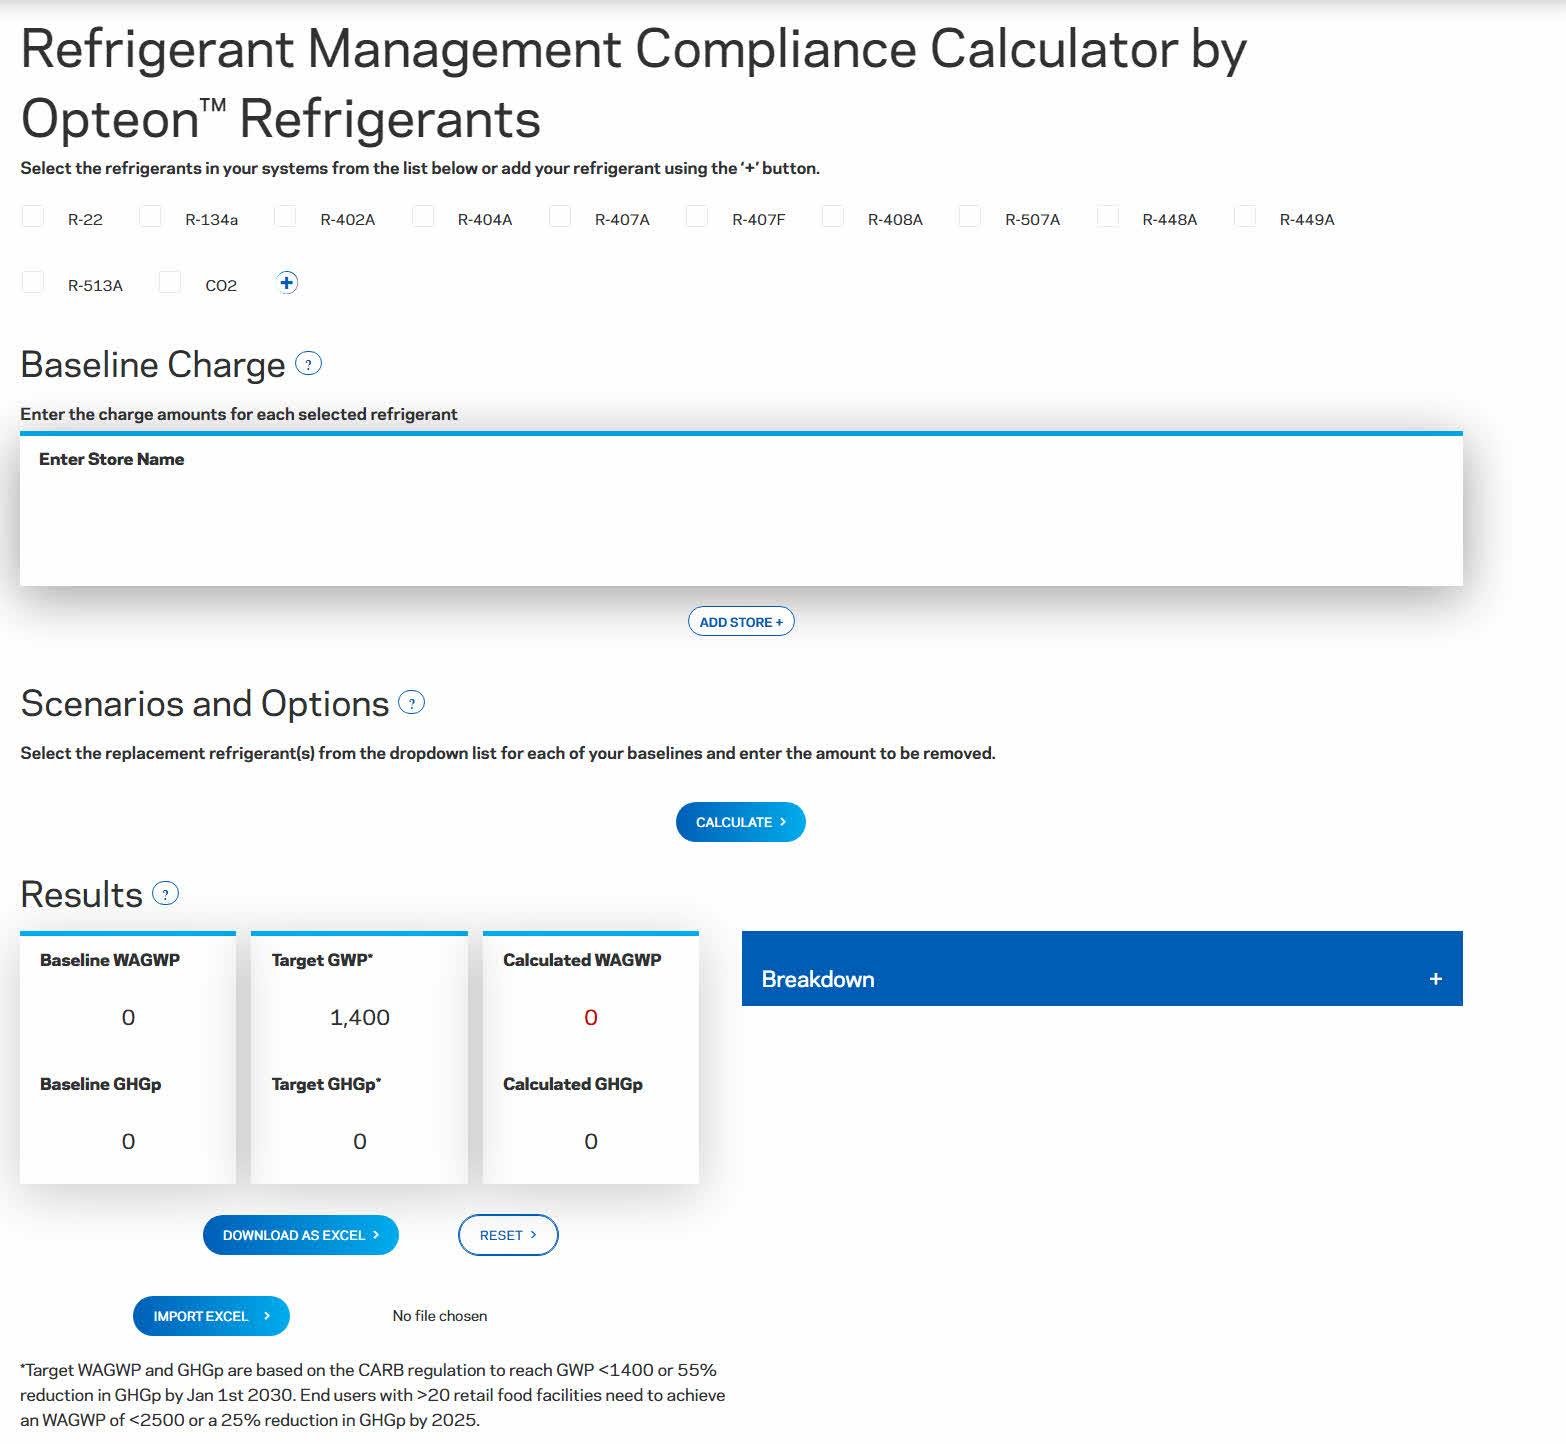 An image of the compliance calculator tool user interface.